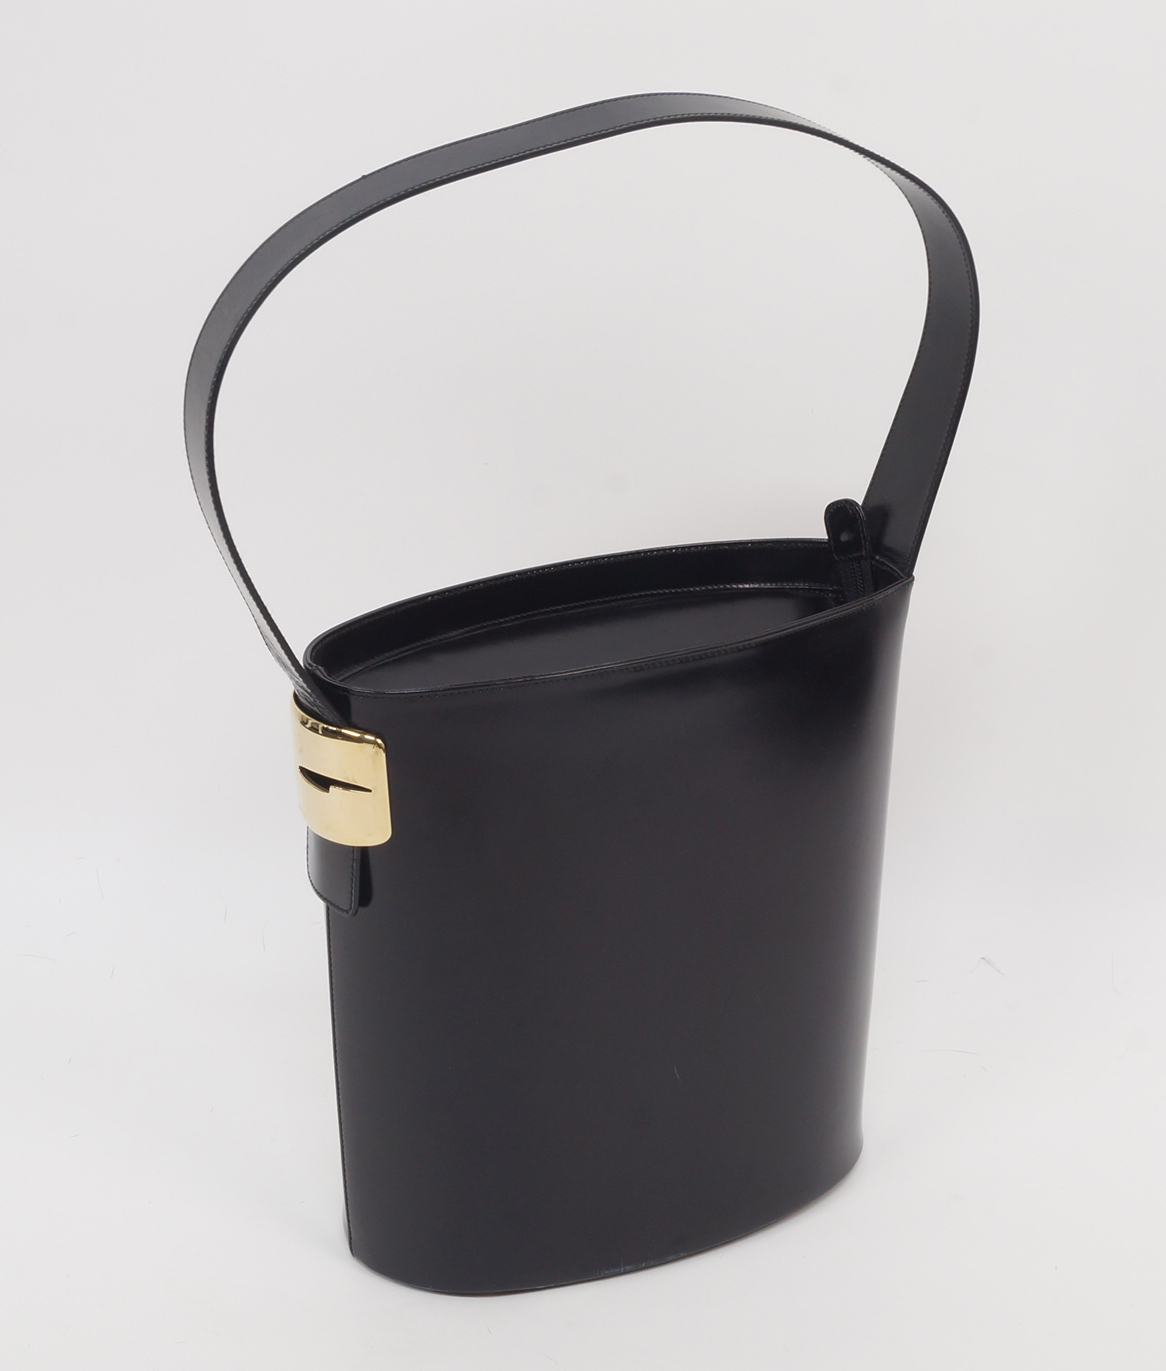 Gucci black leather bucket bag, leather handle and zip closure,